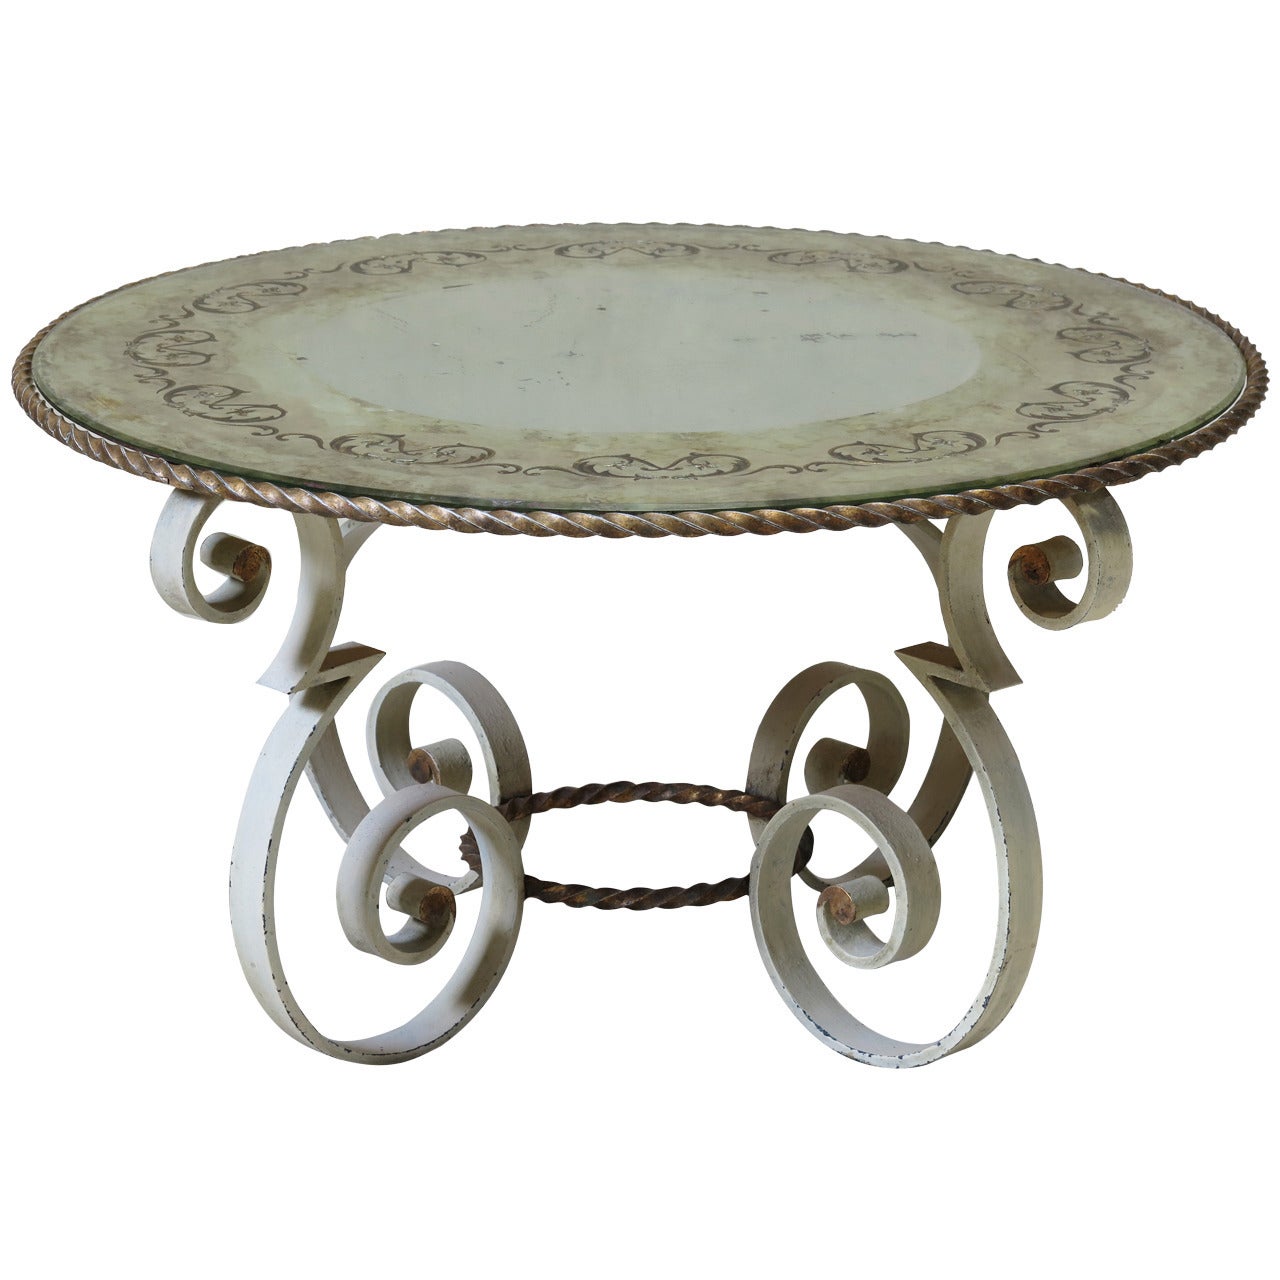 Wrought Iron Coffee Table with Eglomisé Mirror Top, France 1940s